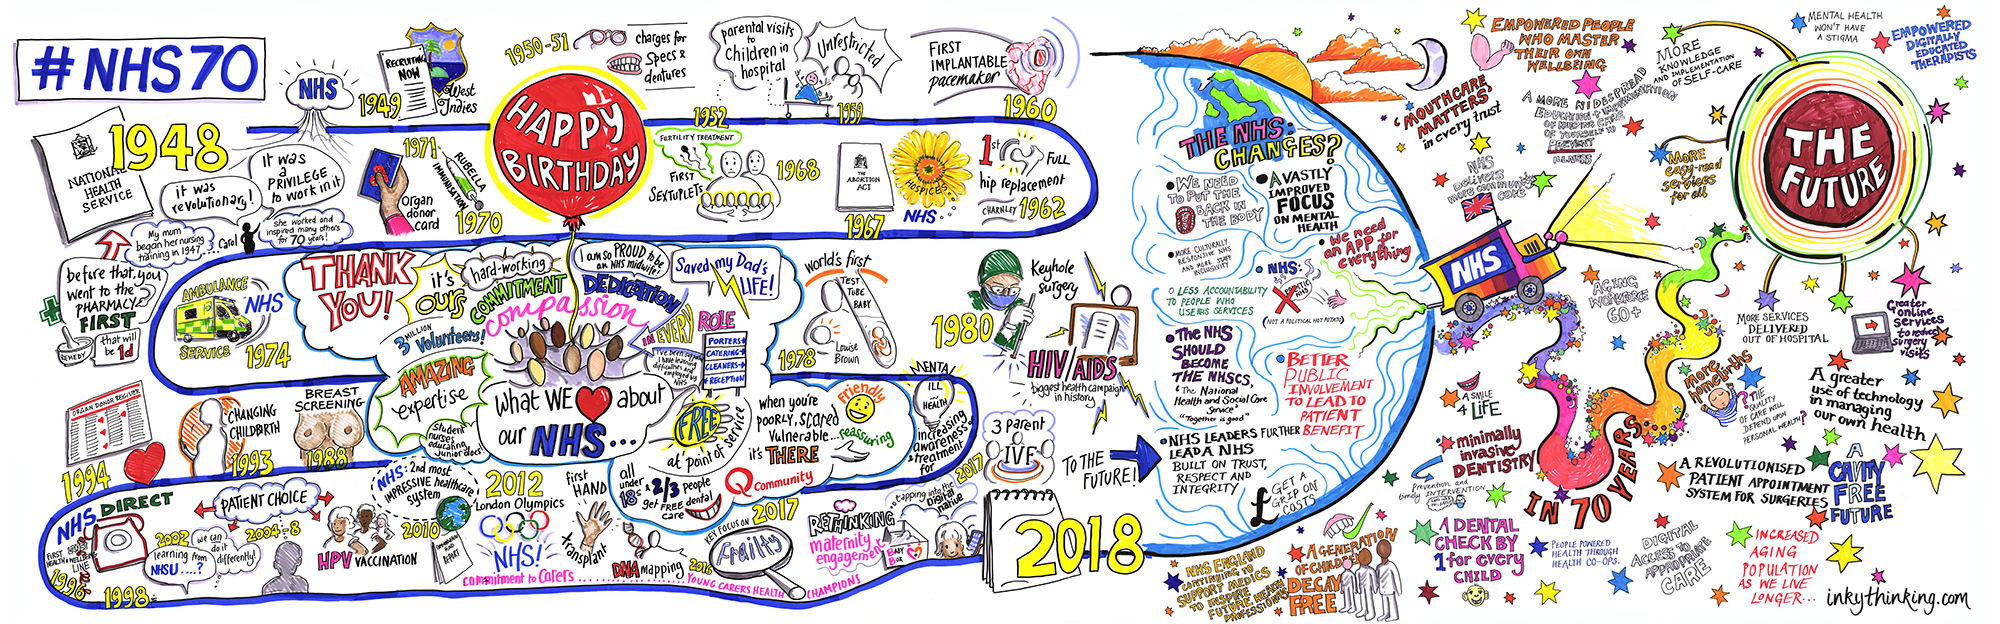 Graphic Recording for NHS Confed Expo live illustration